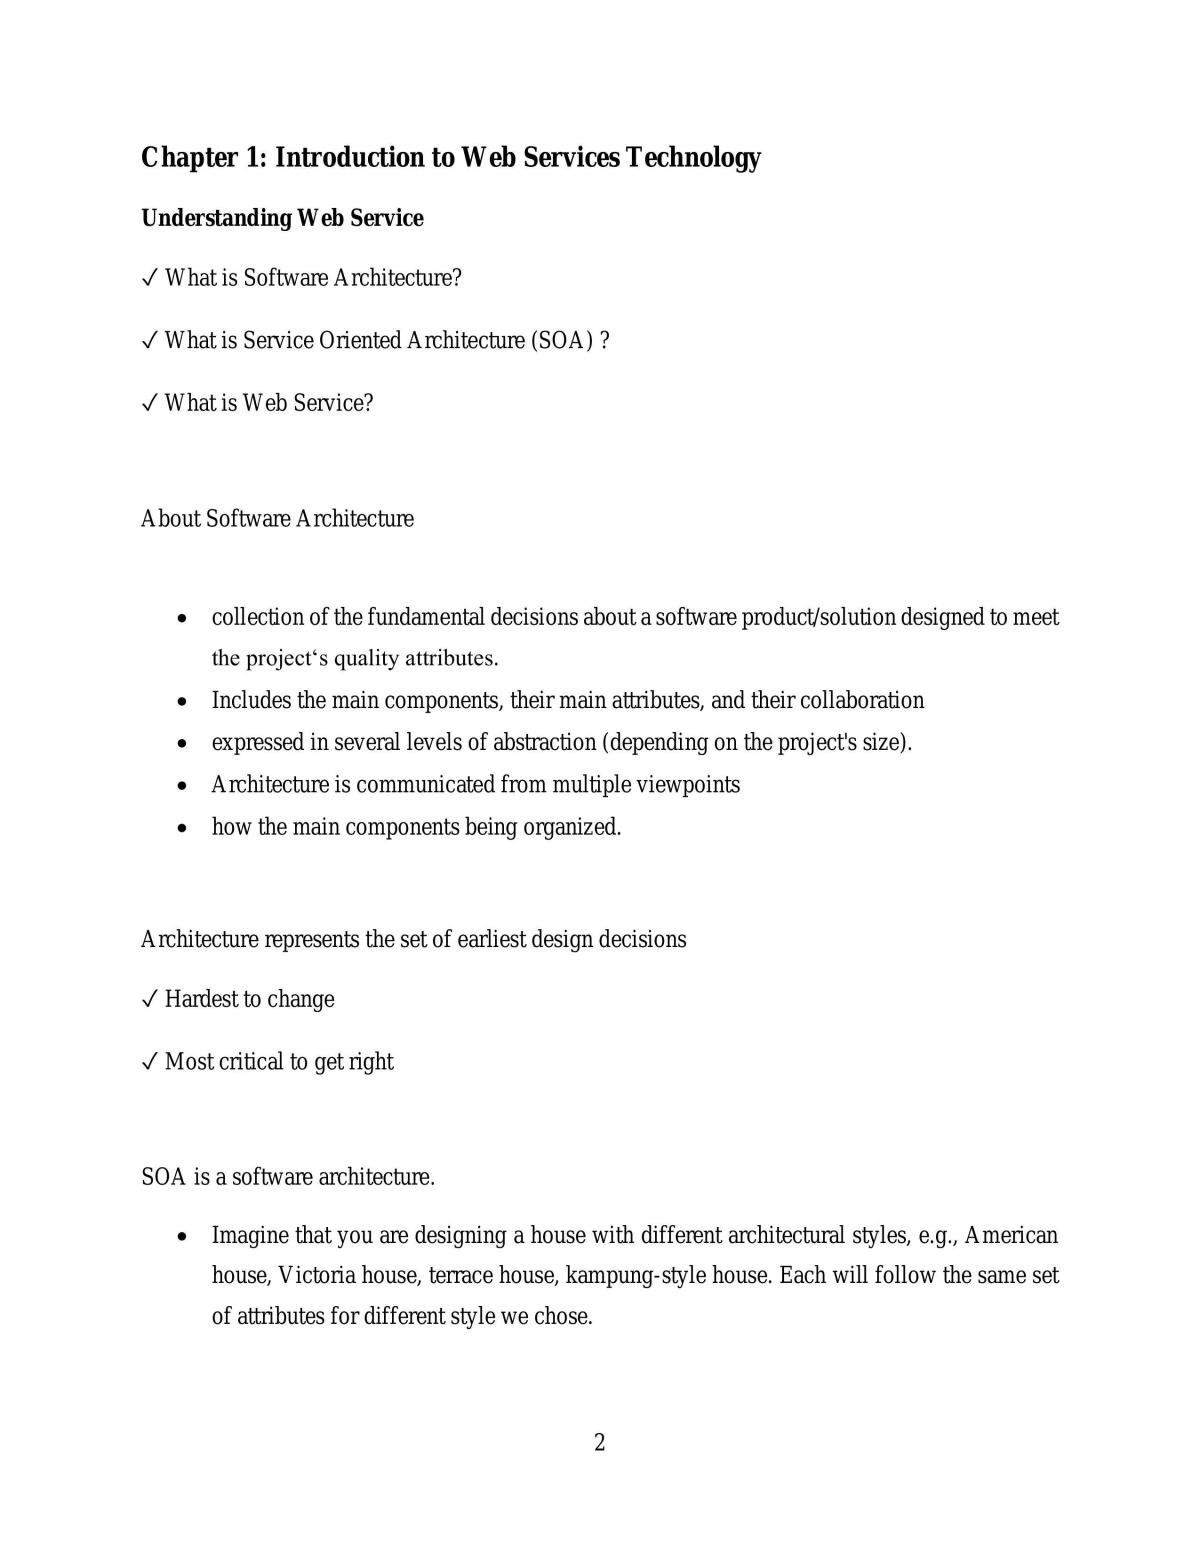 Web Services Technology - Page 2